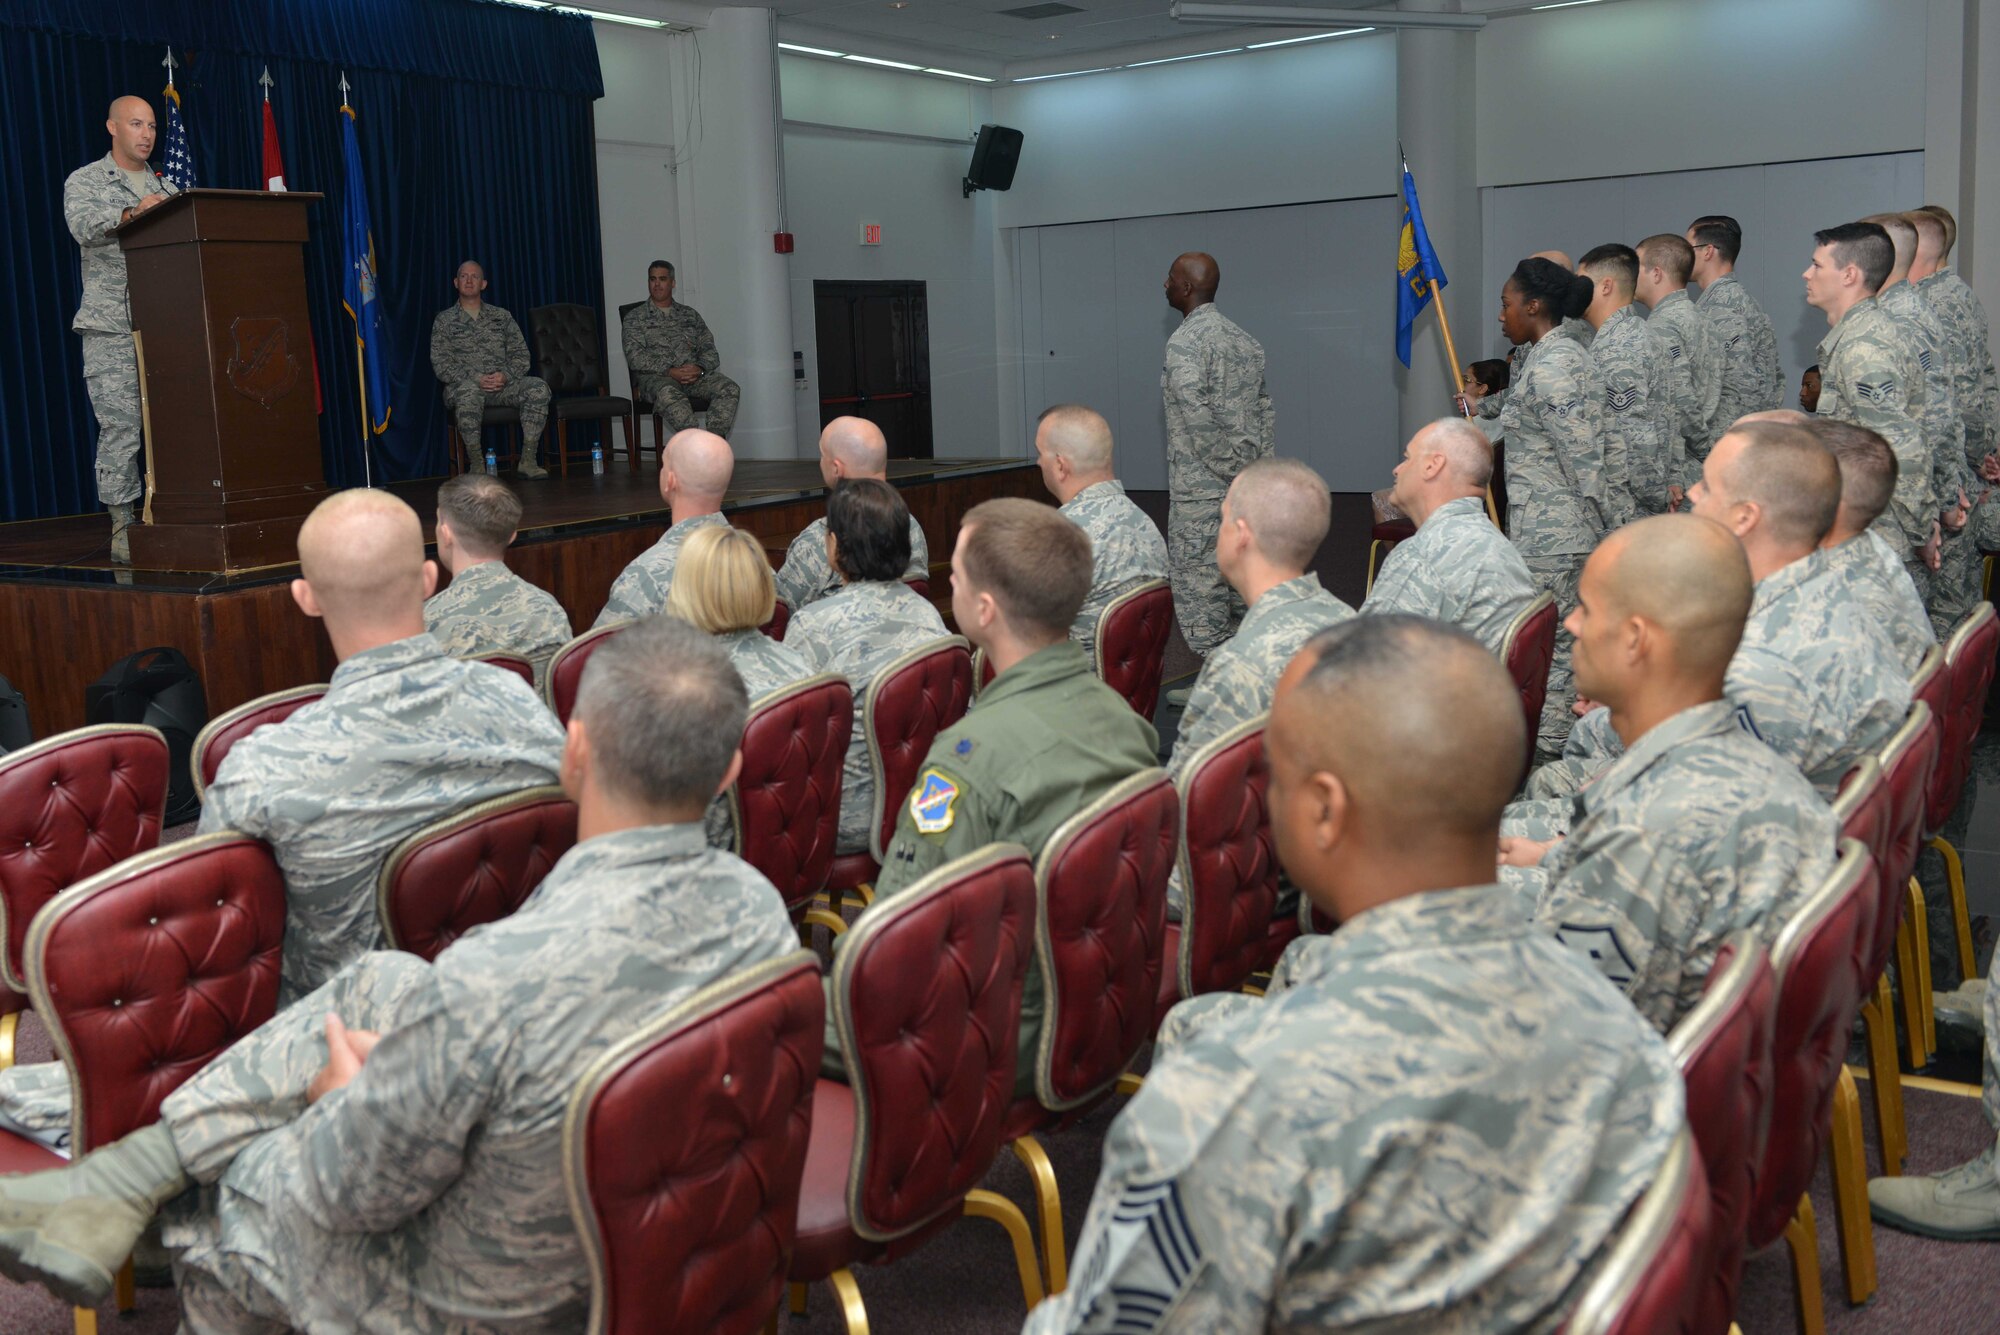 U.S. Air Force Lt. Col. Timothy Meerstein, 39th Communications Squadron incoming commander, speaks to Airmen in attendance at a change of command ceremony June 14, 2016, at Incirlik Air Base, Turkey. Prior to taking command, Meerstein served as the chief of the operations division, communications and information directorate, Headquarters Air Force Special Operations Command, Hurlburt Field, Florida. (U.S. Air Force photo by Senior Airman John Nieves Camacho/Released)